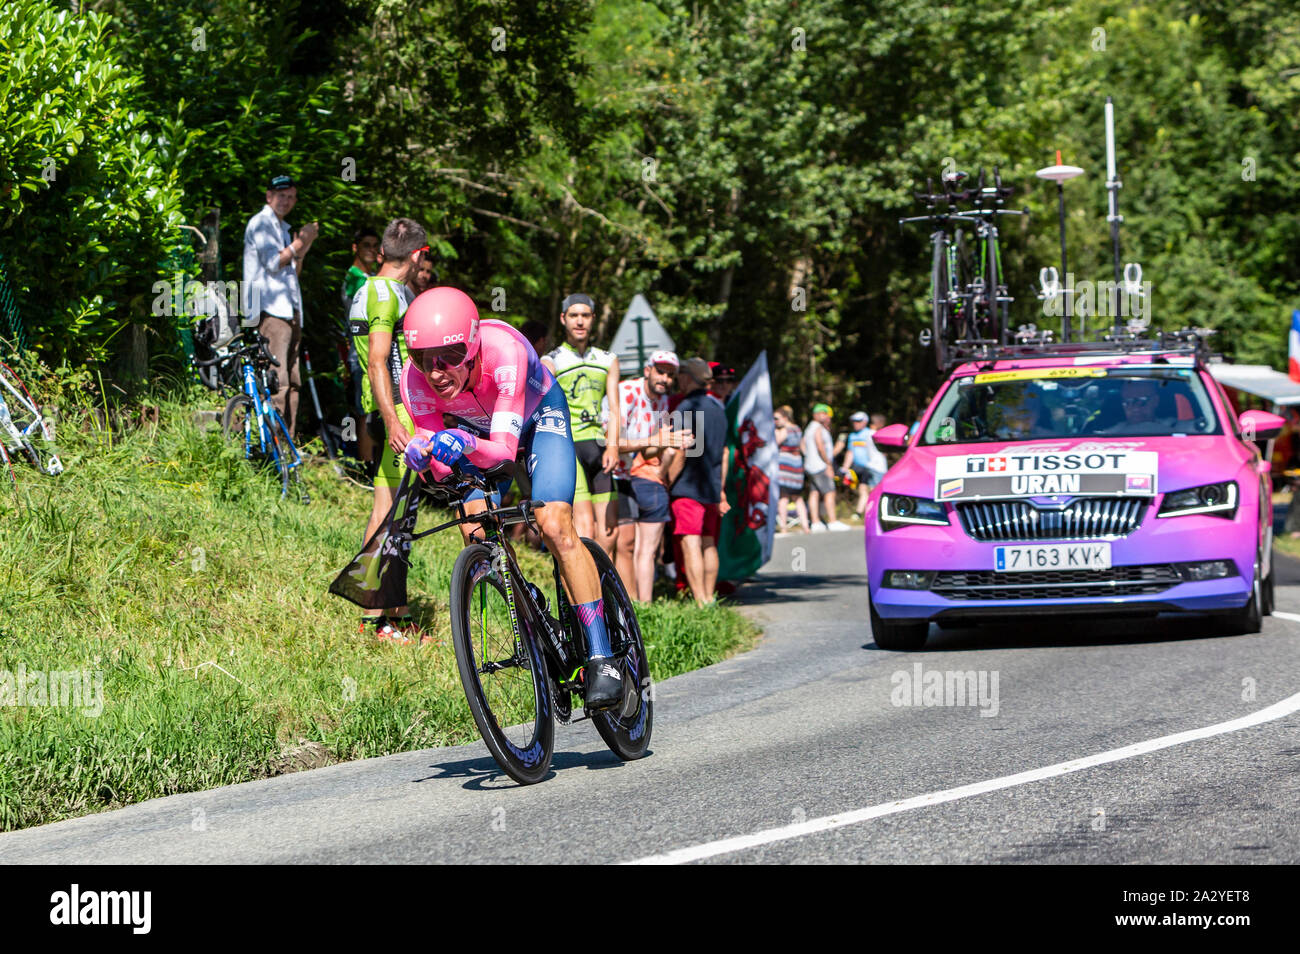 Bosdarros, France - July 19, 2019: The Colombian cyclist Rigoberto Uran of Team EF Education First riding during stage 13, individual time trial, of Le Tour de France 2019. Stock Photo